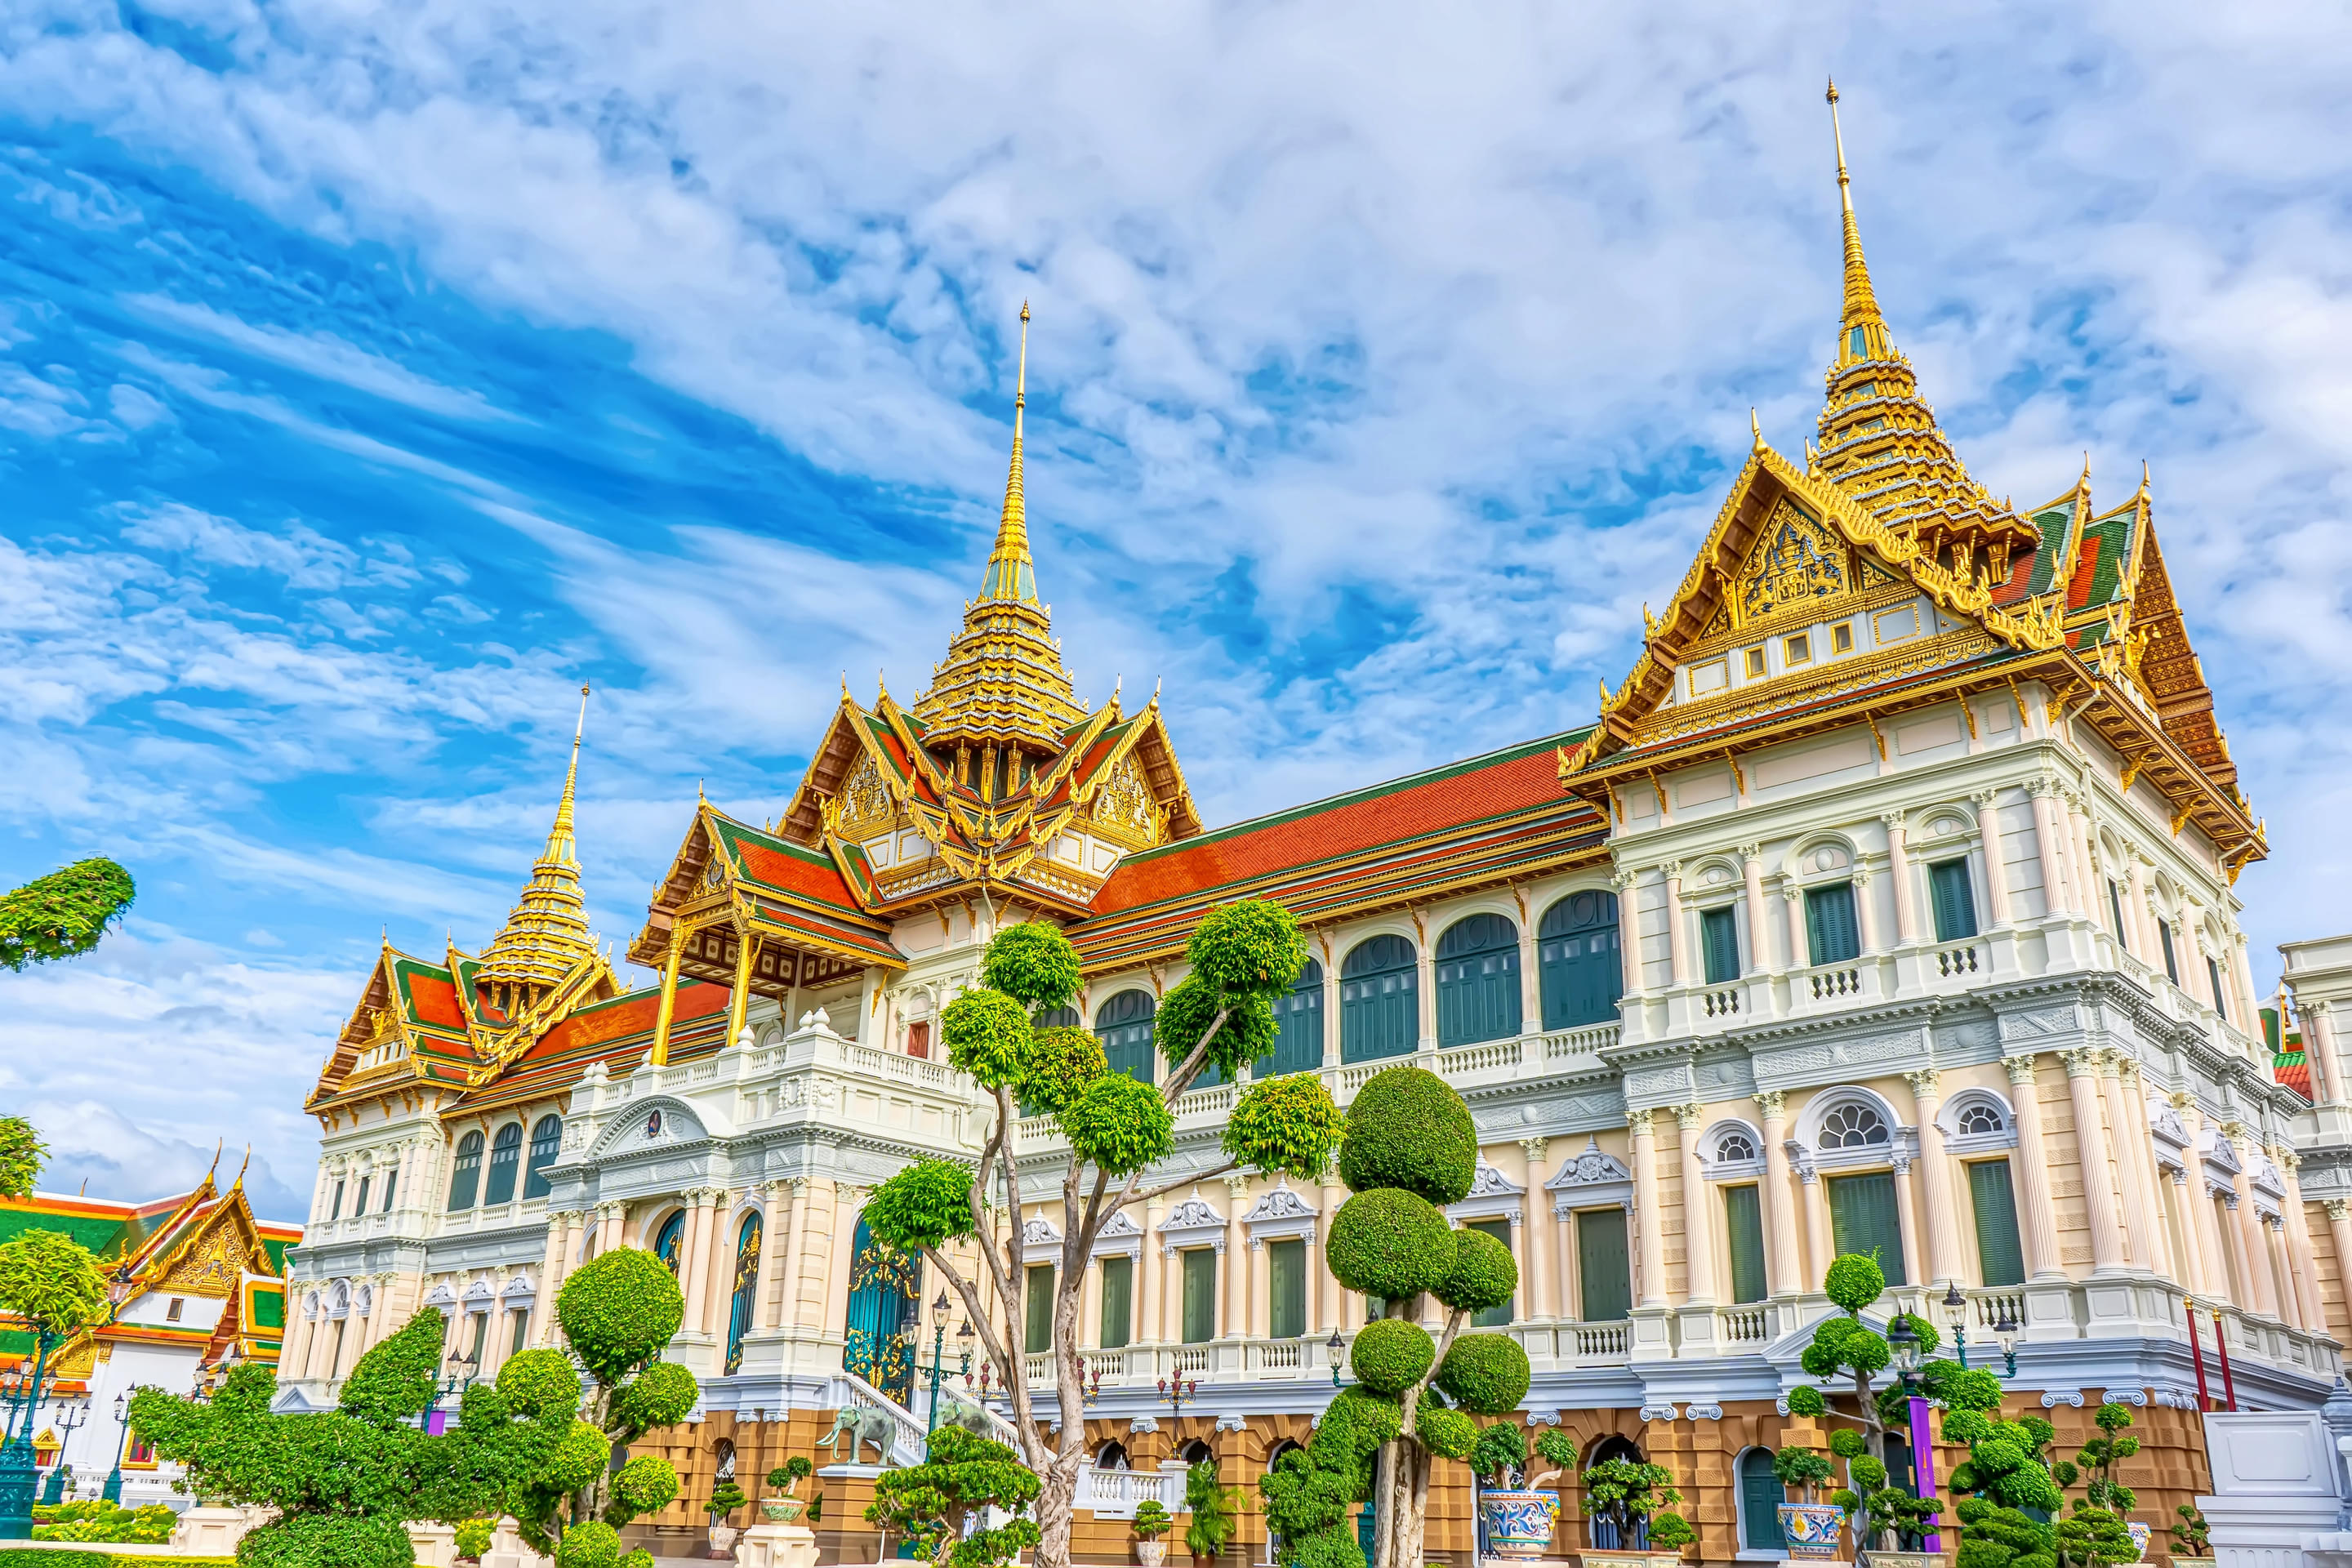 ﻿The Grand Palace Overview